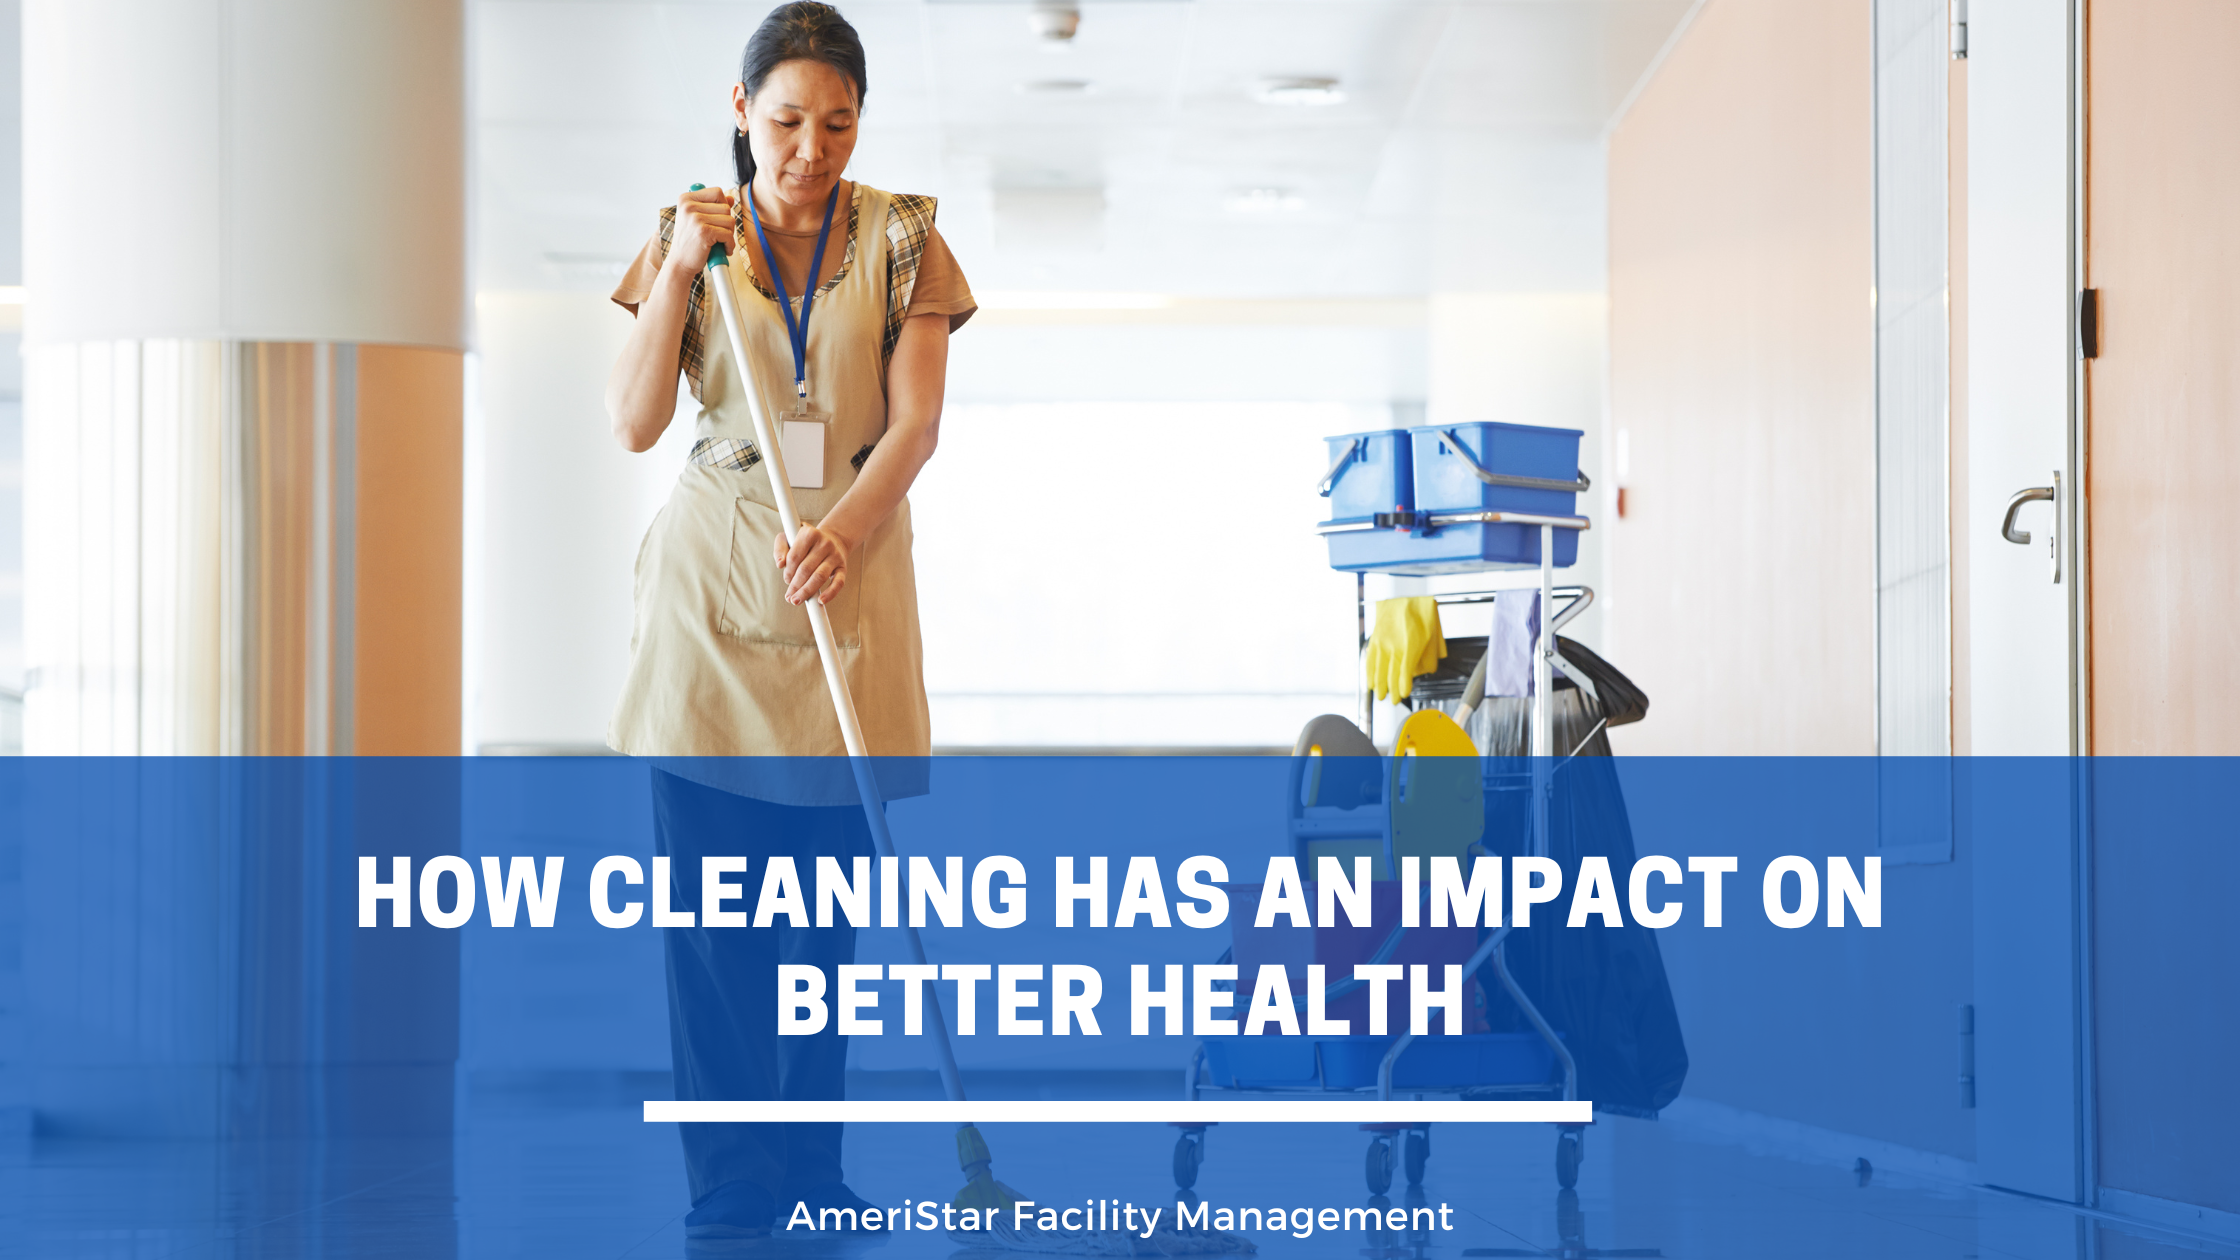 How Cleaning and Disinfecting Your BusinessFacility Has an Impact on Better Health